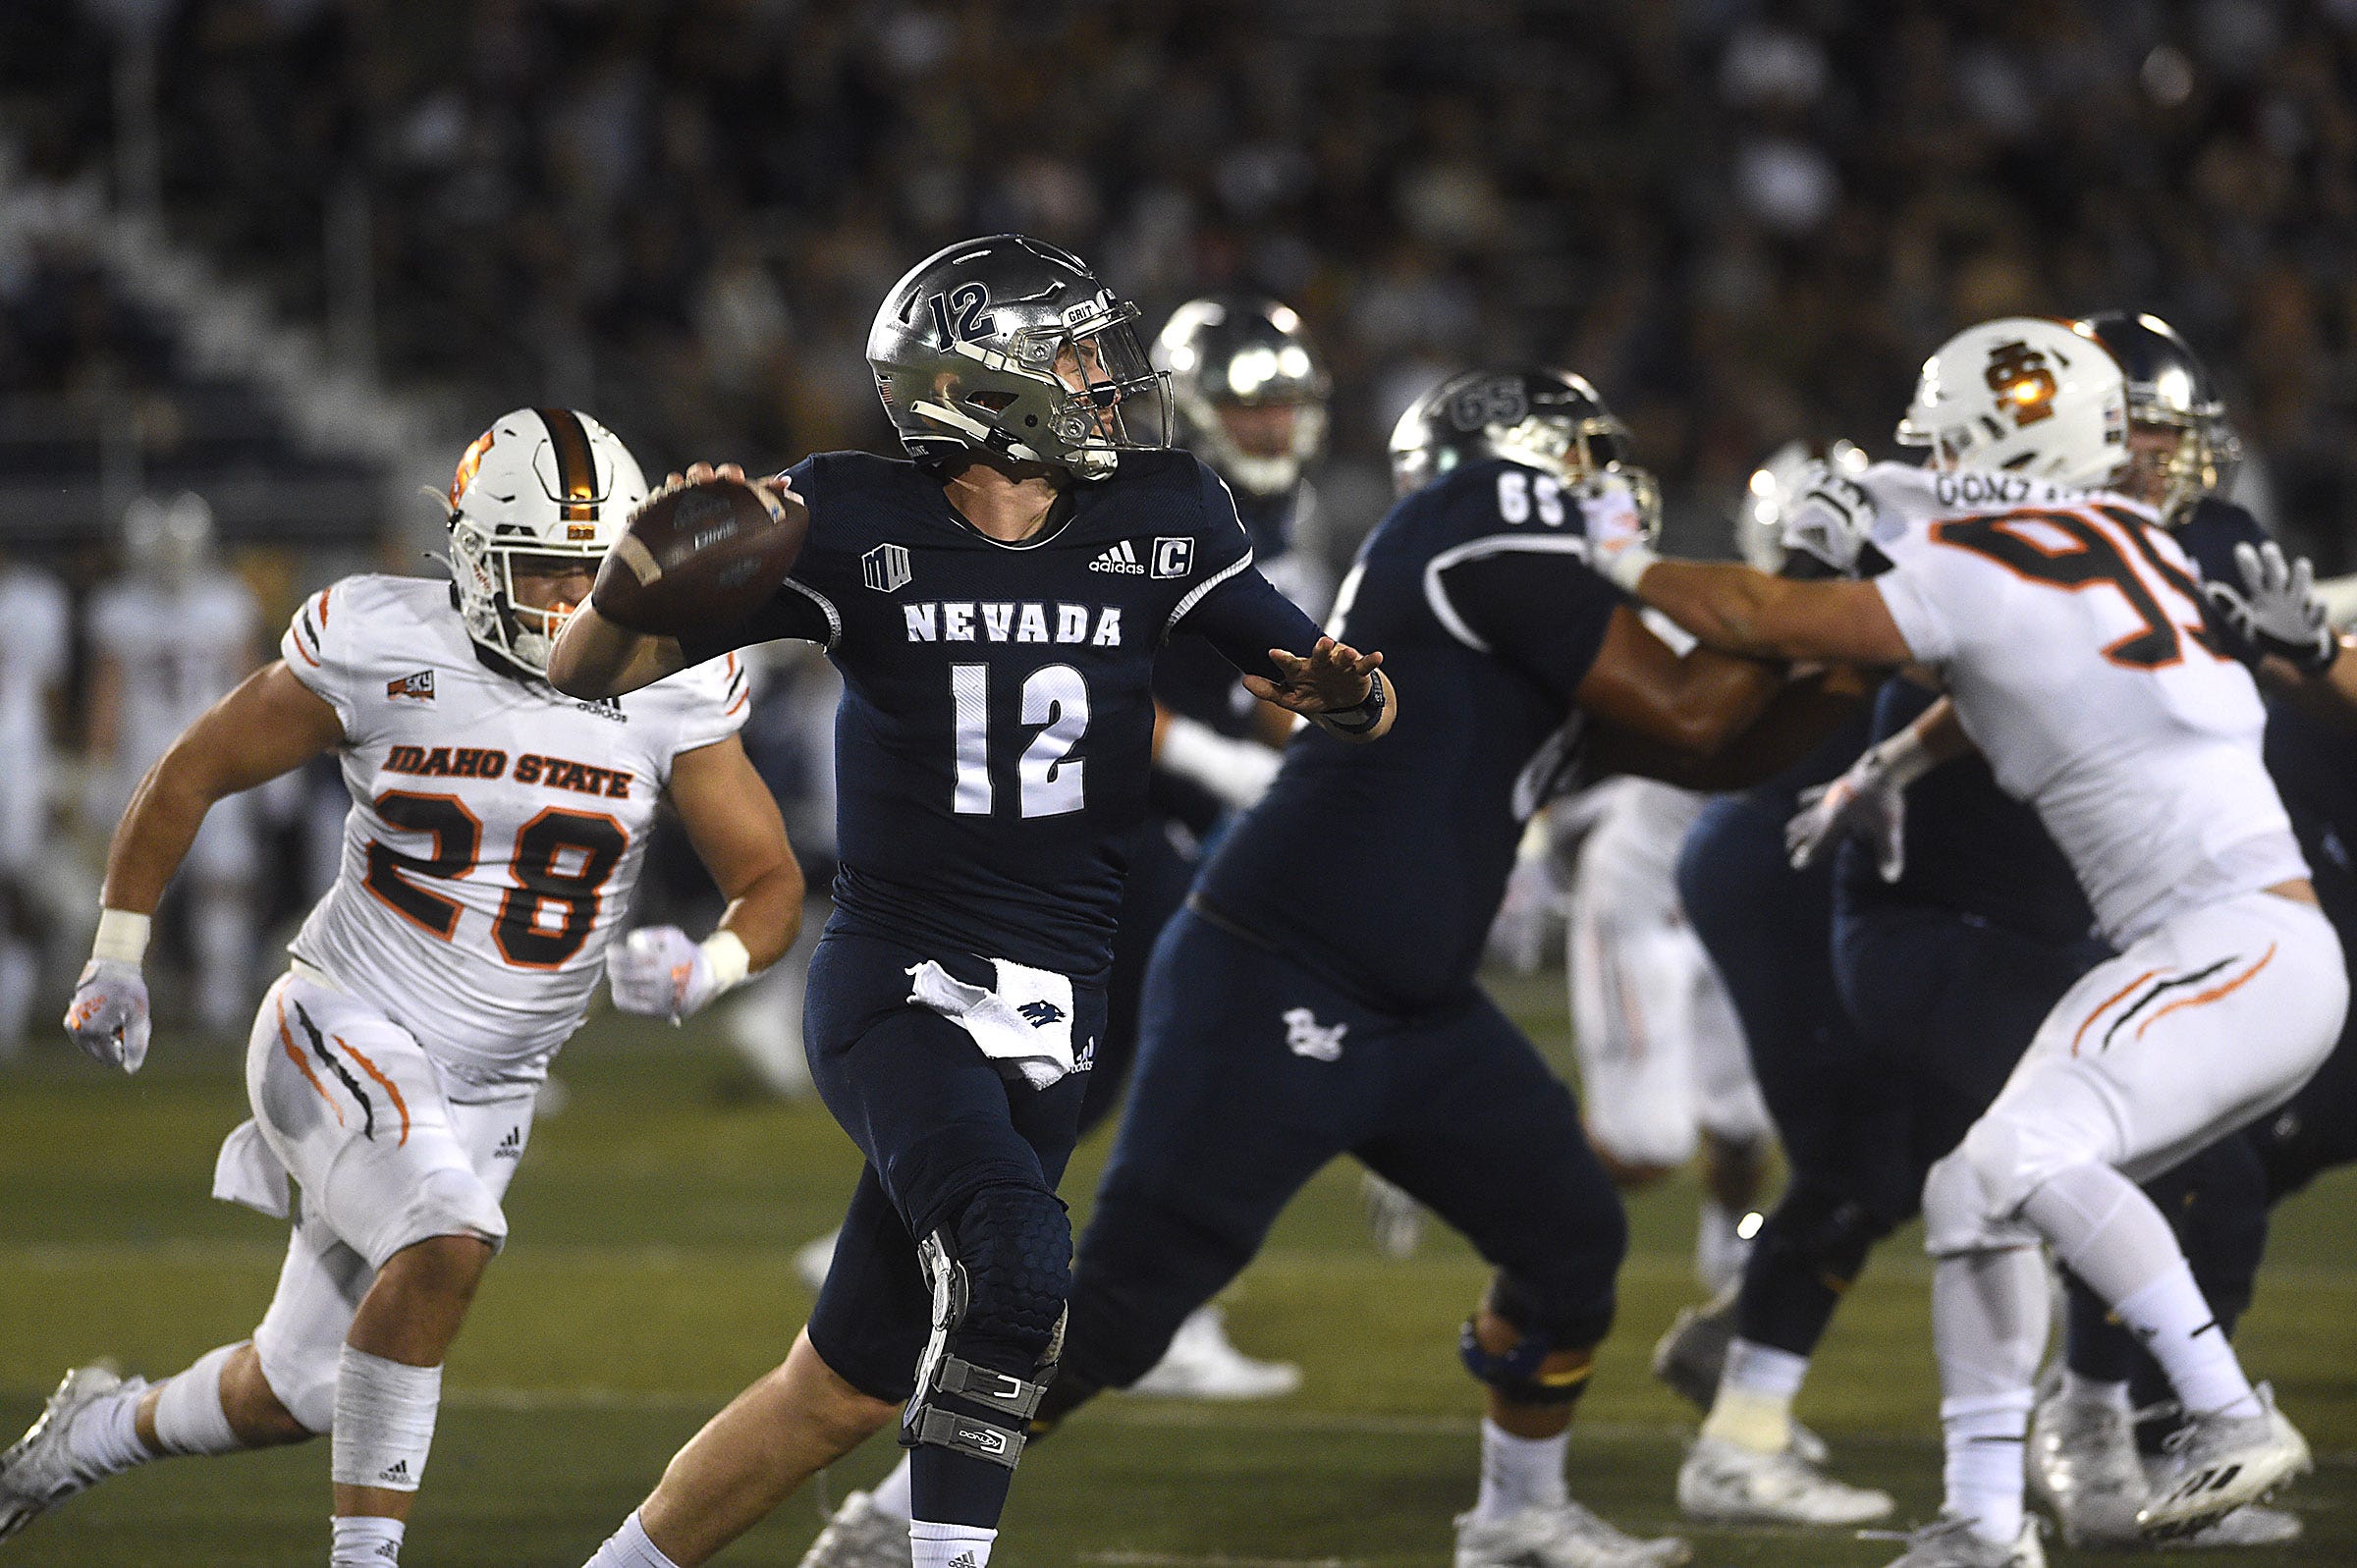 Nevada's Carson Strong looks to throw while taking on Idaho State at Mackay Stadium in Reno on Sept. 11, 2021.